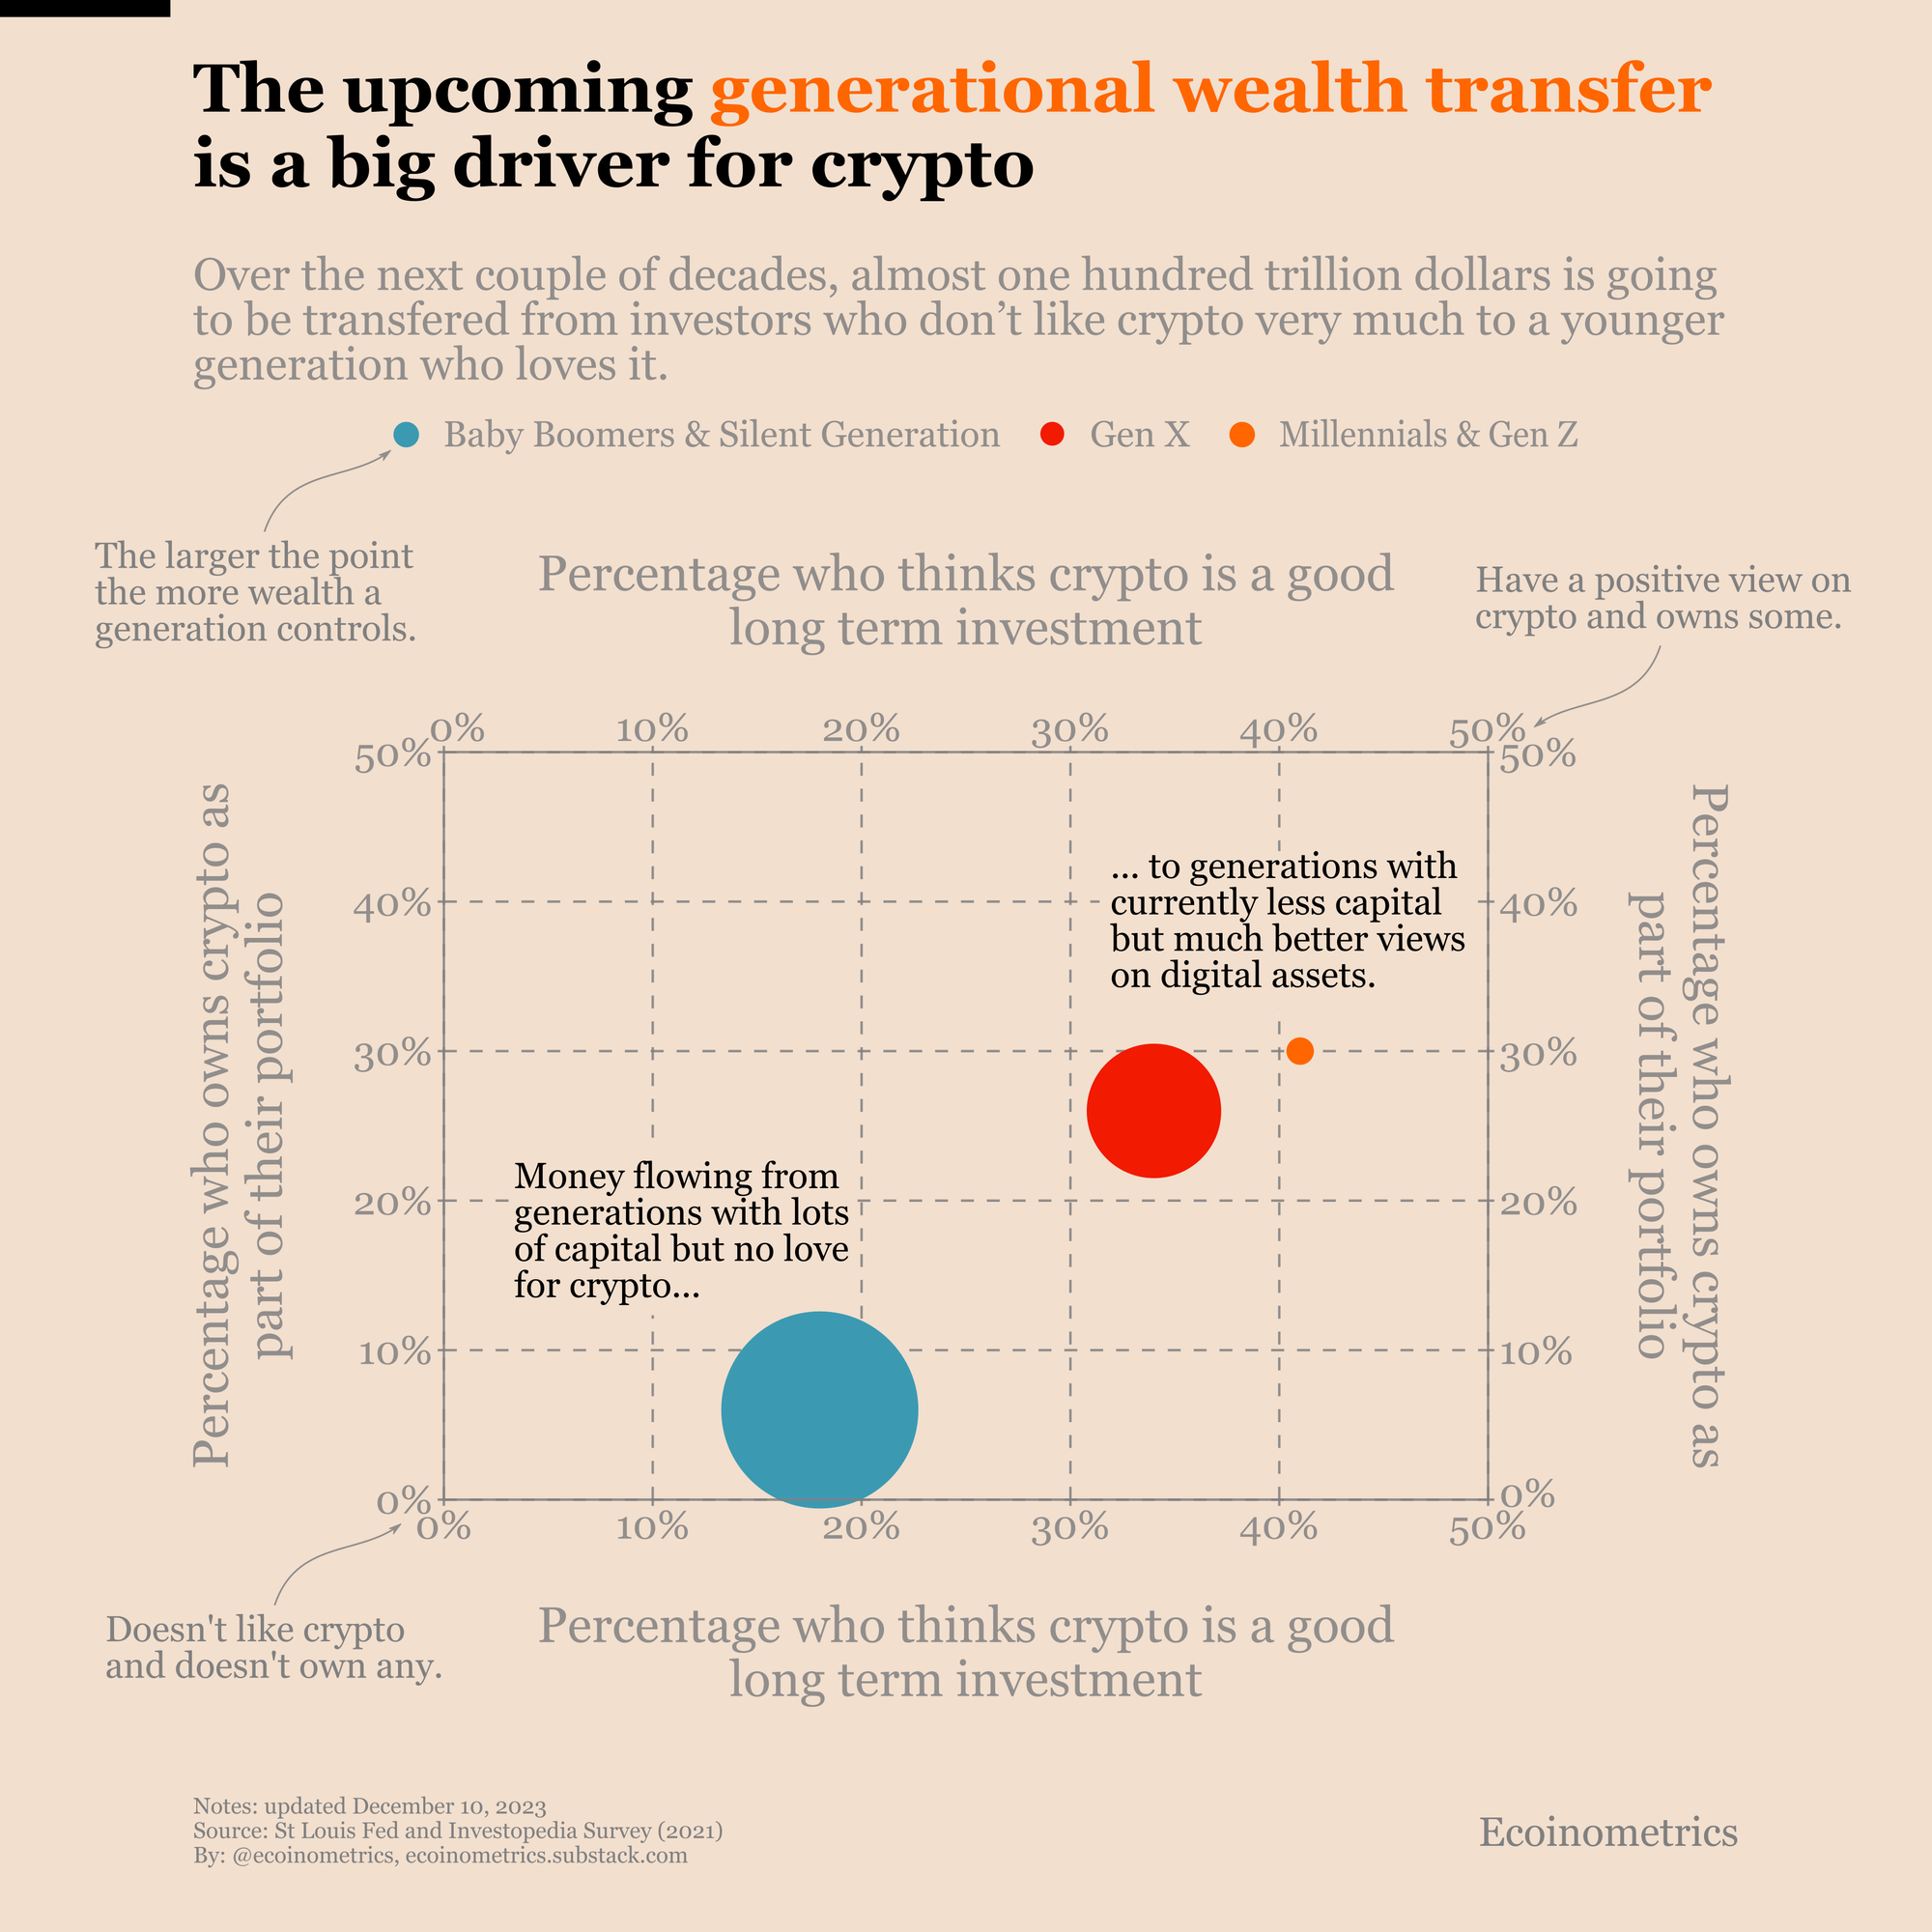 Relation between the total wealth and their appreciation for crypto by generation.